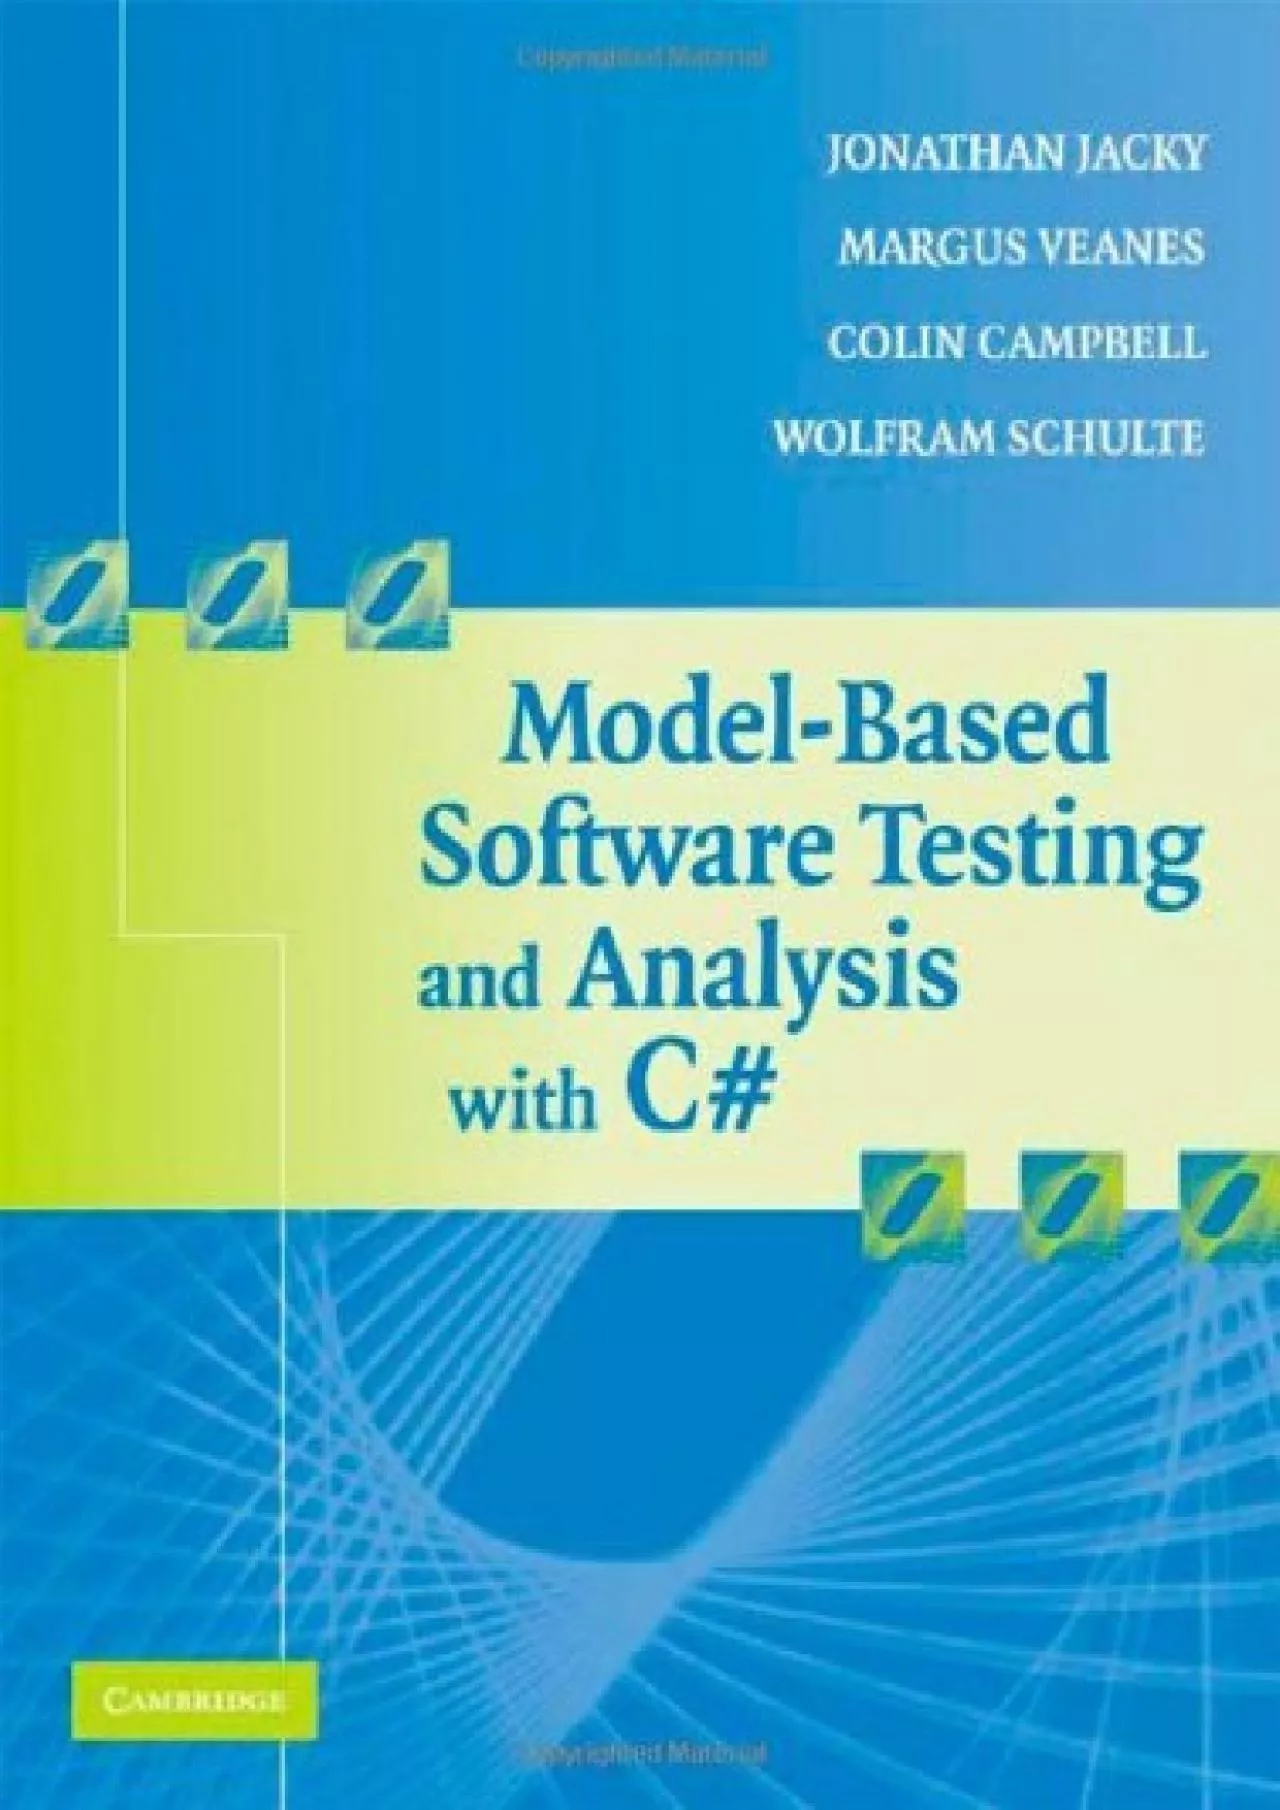 [BEST]-Model-Based Software Testing and Analysis with C: A Model-Based Approach Using